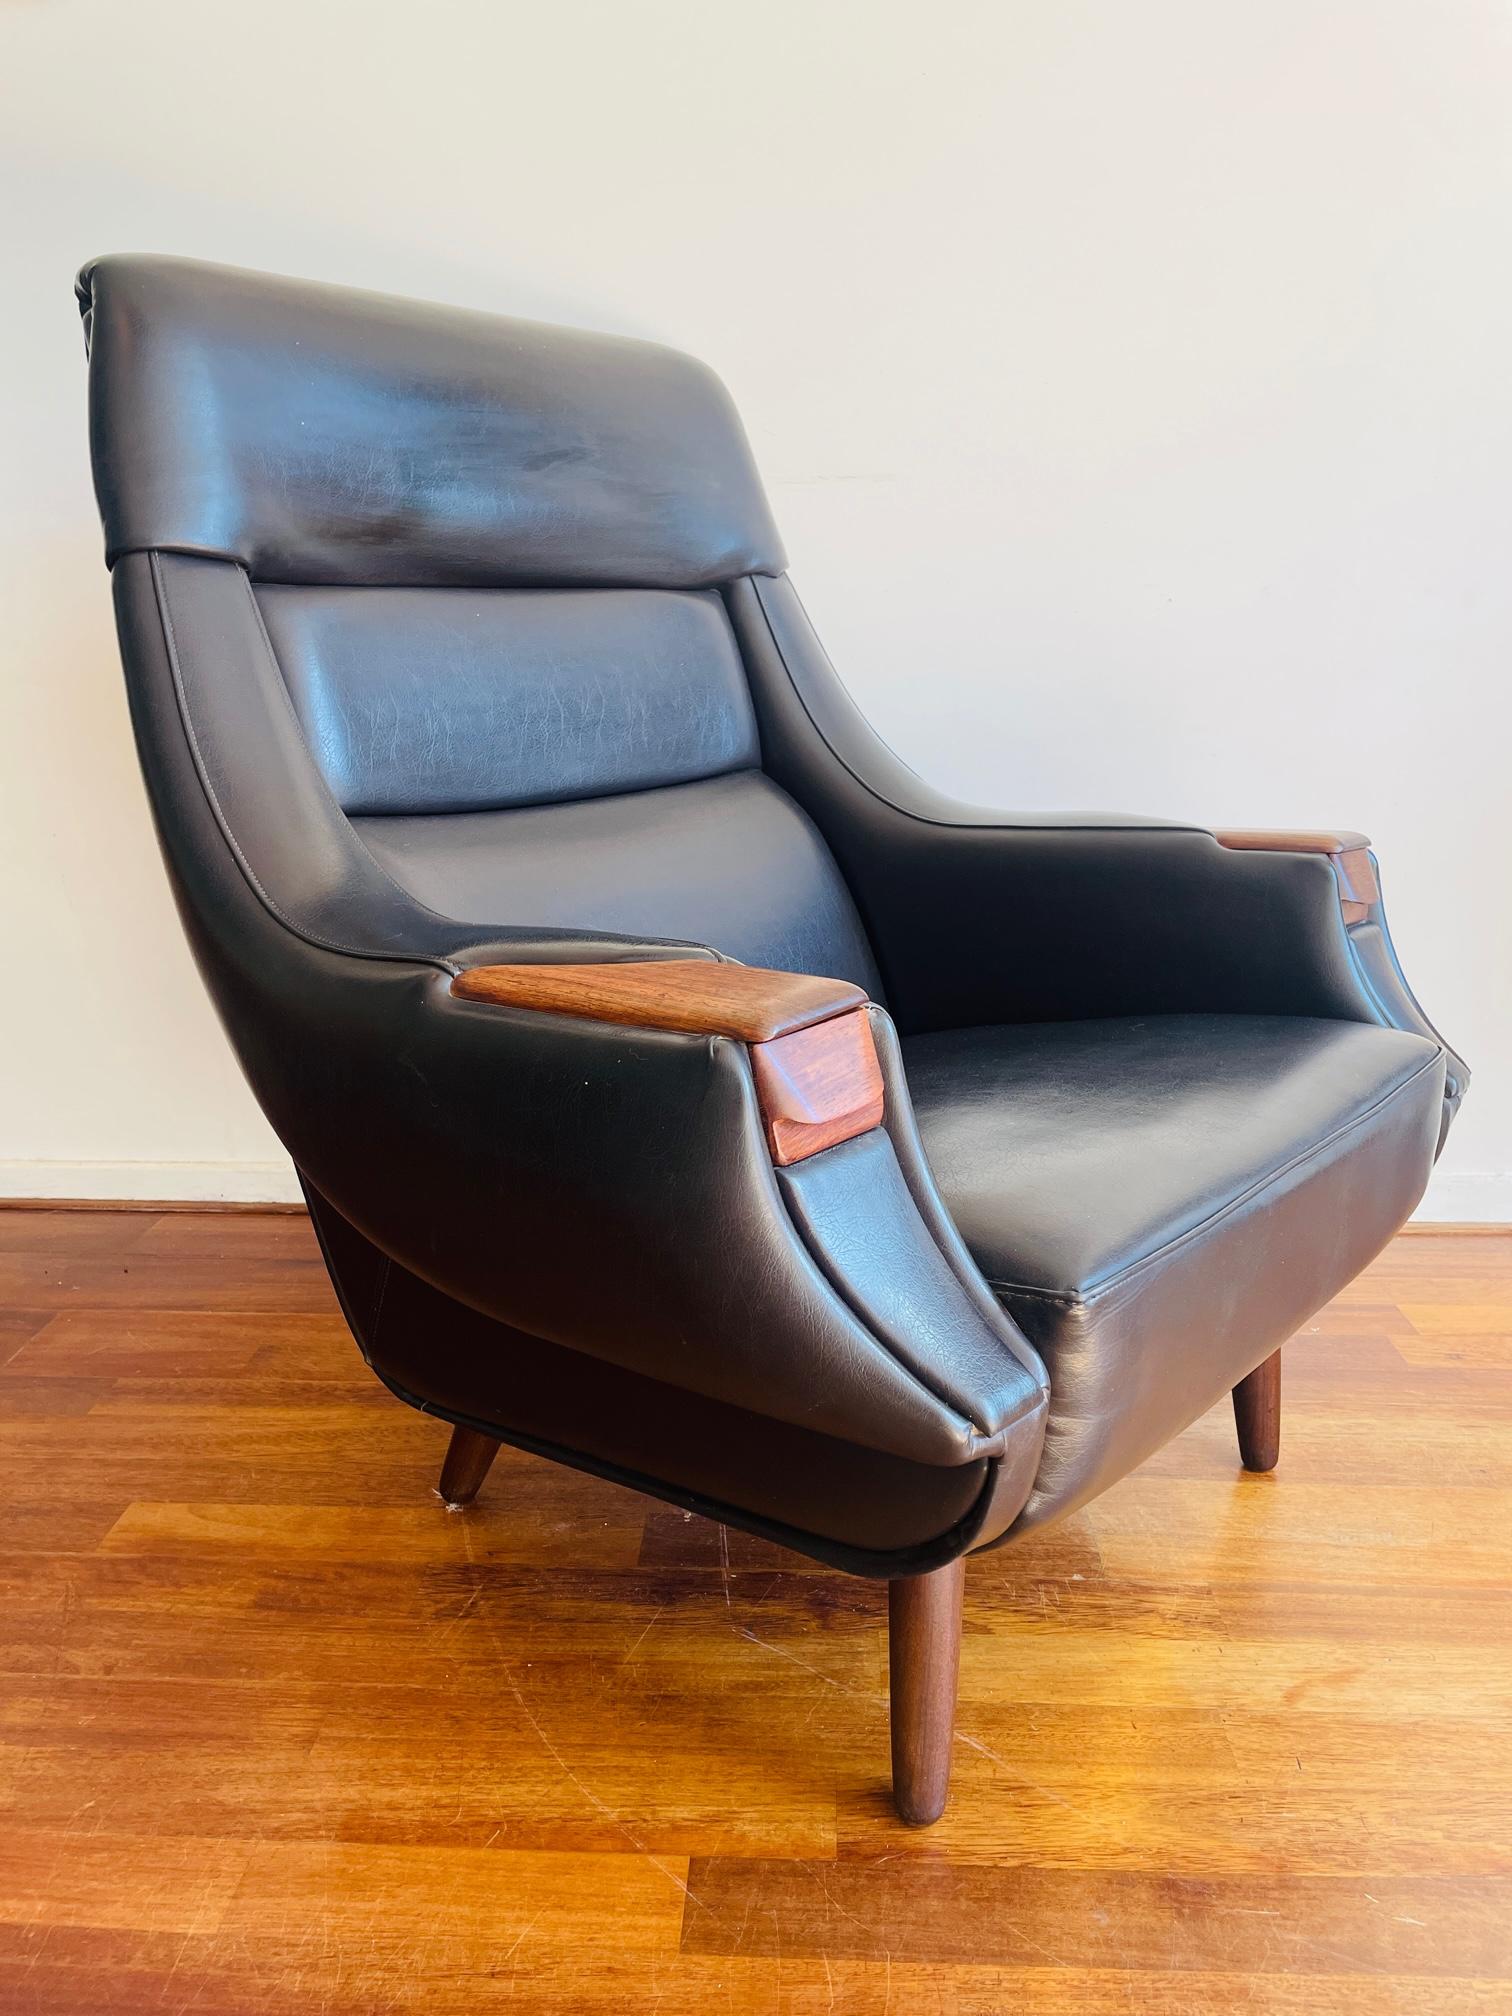 Henry Walter Klein for Bramin, lounge chair, black leather, wood, Denmark, 1960s.

Robust and comfortable lounge chair by the Danish designer H.W. Klein. The slightly curved shape of the backrest has a highly inviting appearance. The chair has